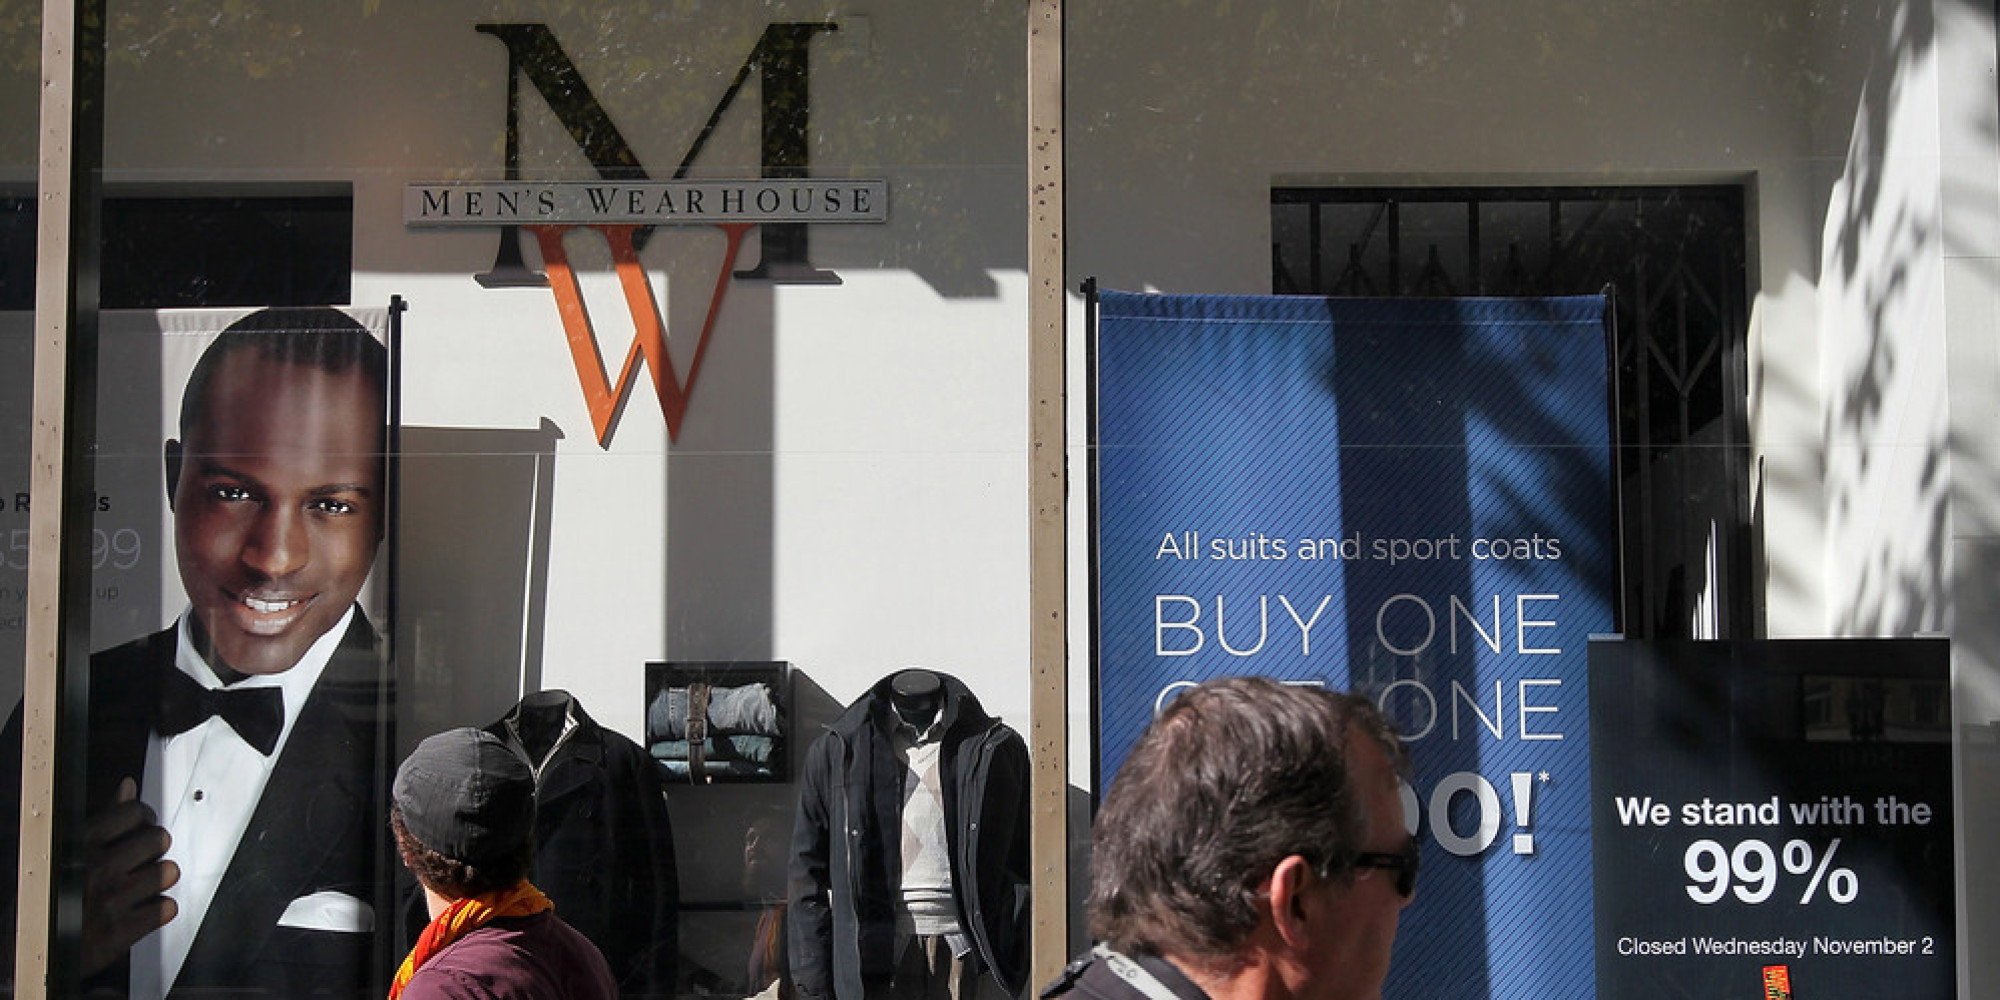 Jos. A. Bank's Offer To Buy Men's Wearhouse Is Rejected (UPDATED